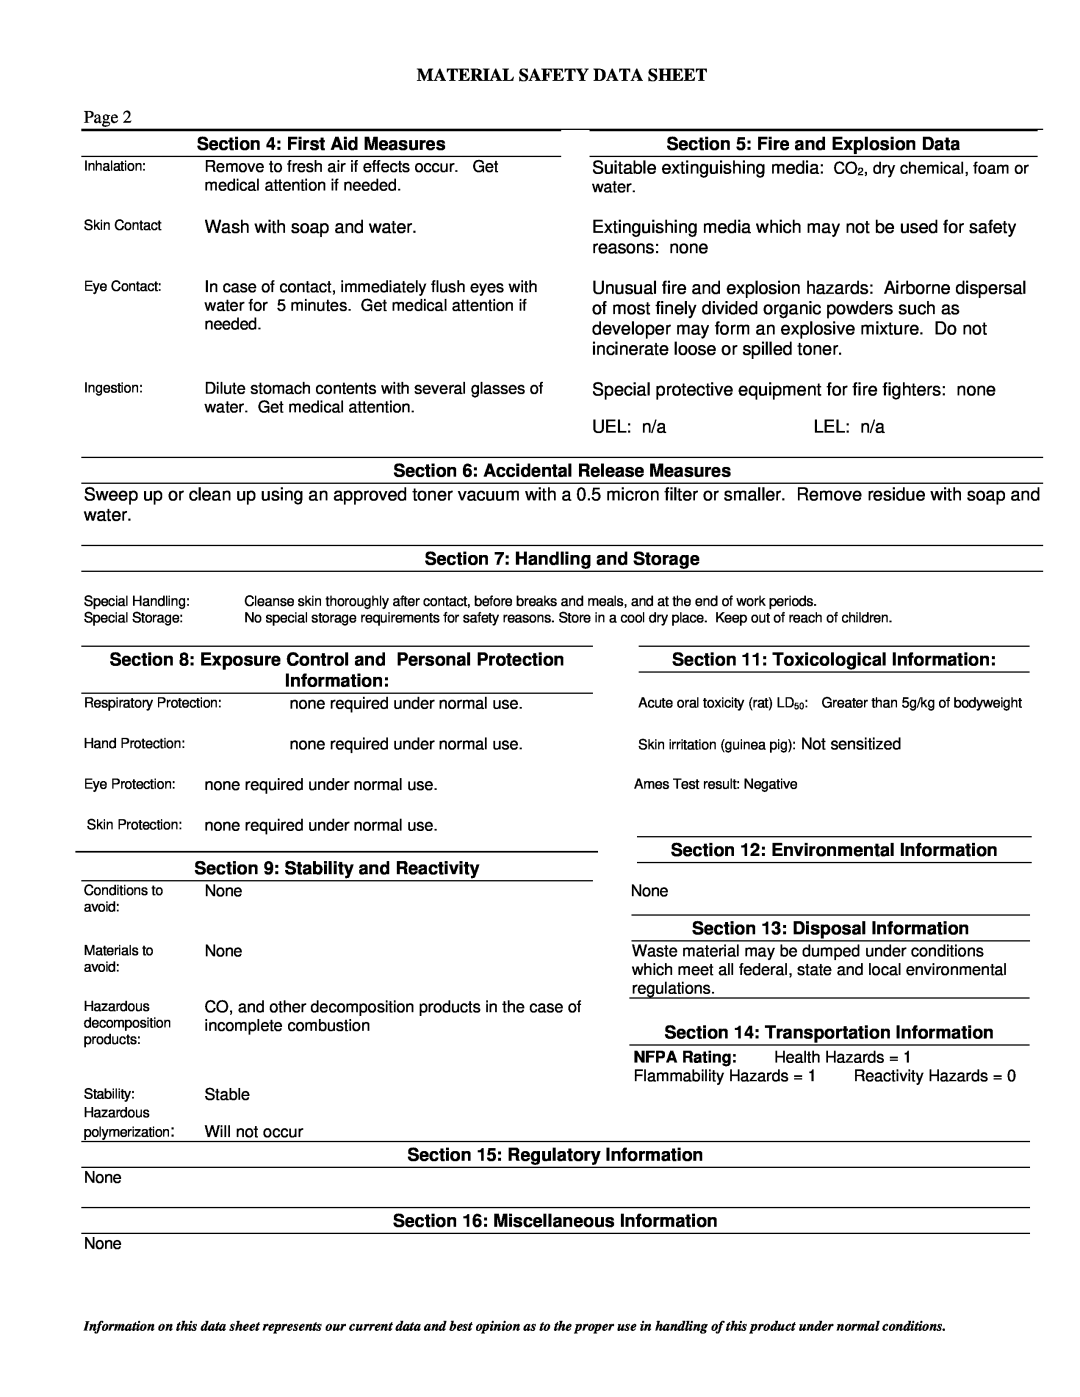 Lanier 117-0230 manual Material Safety Data Sheet, First Aid Measures 